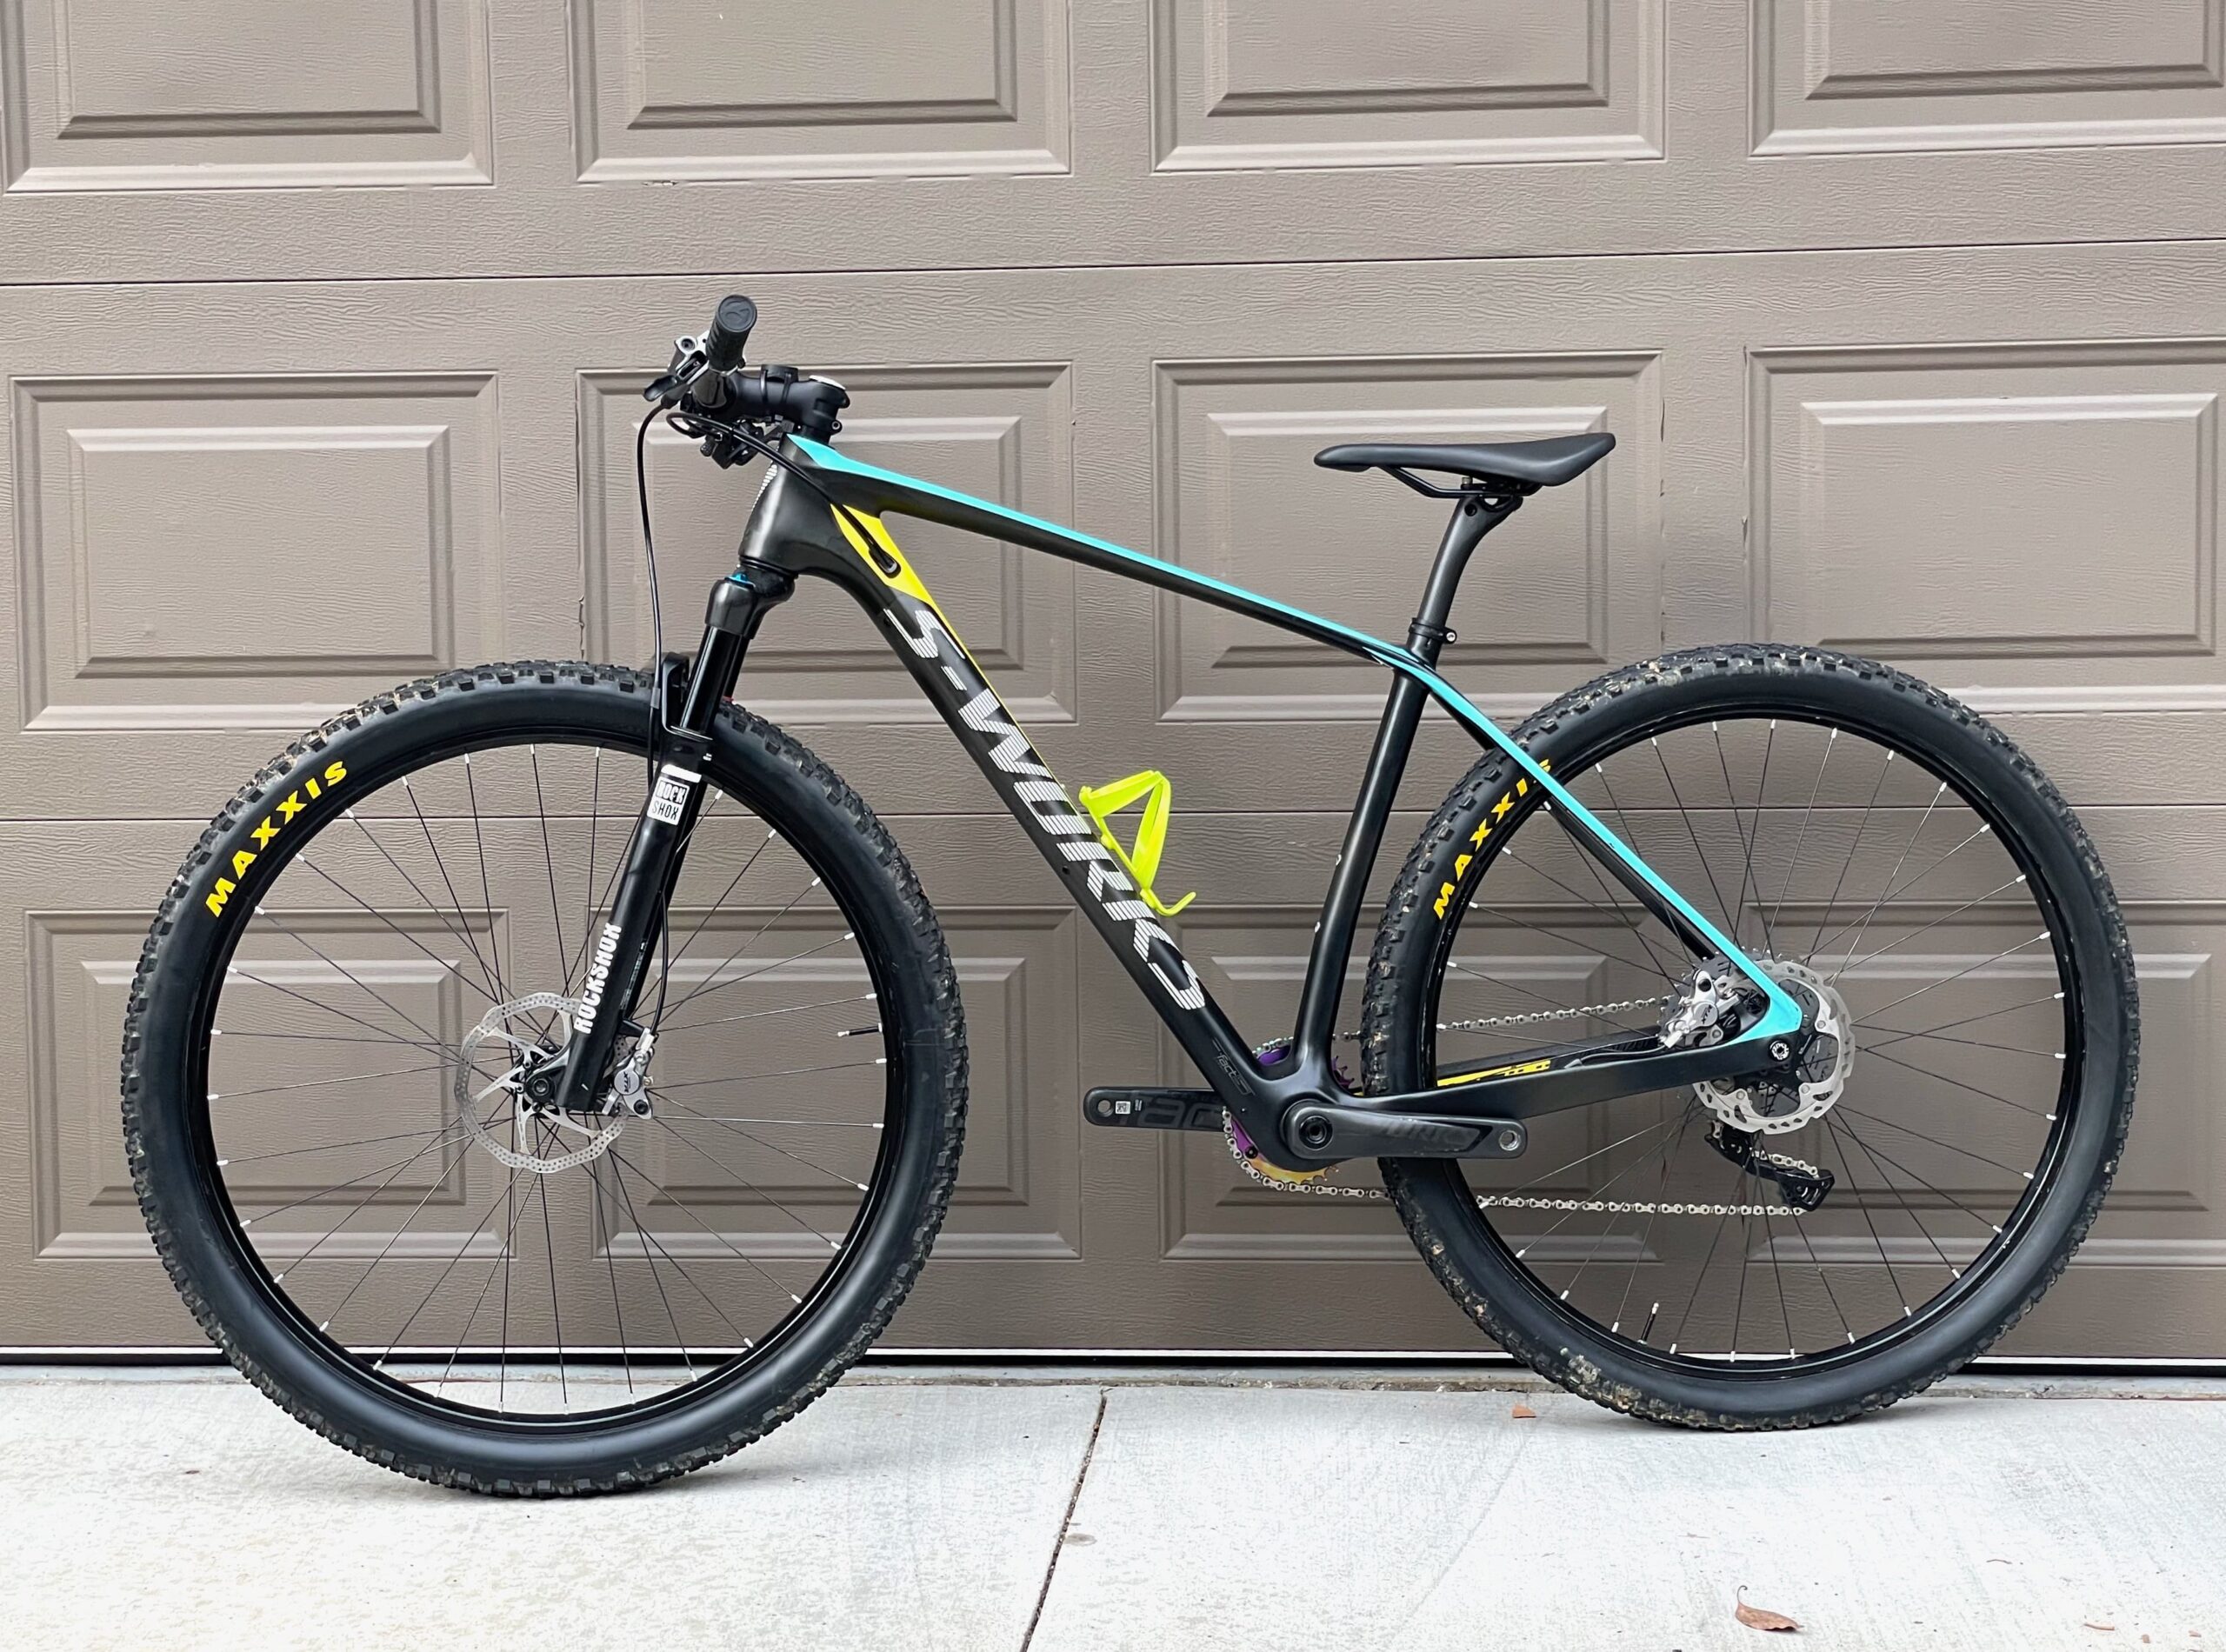 Specialized S-Works Stumpjumper 29 Hardtail Carbon Mountain Bike